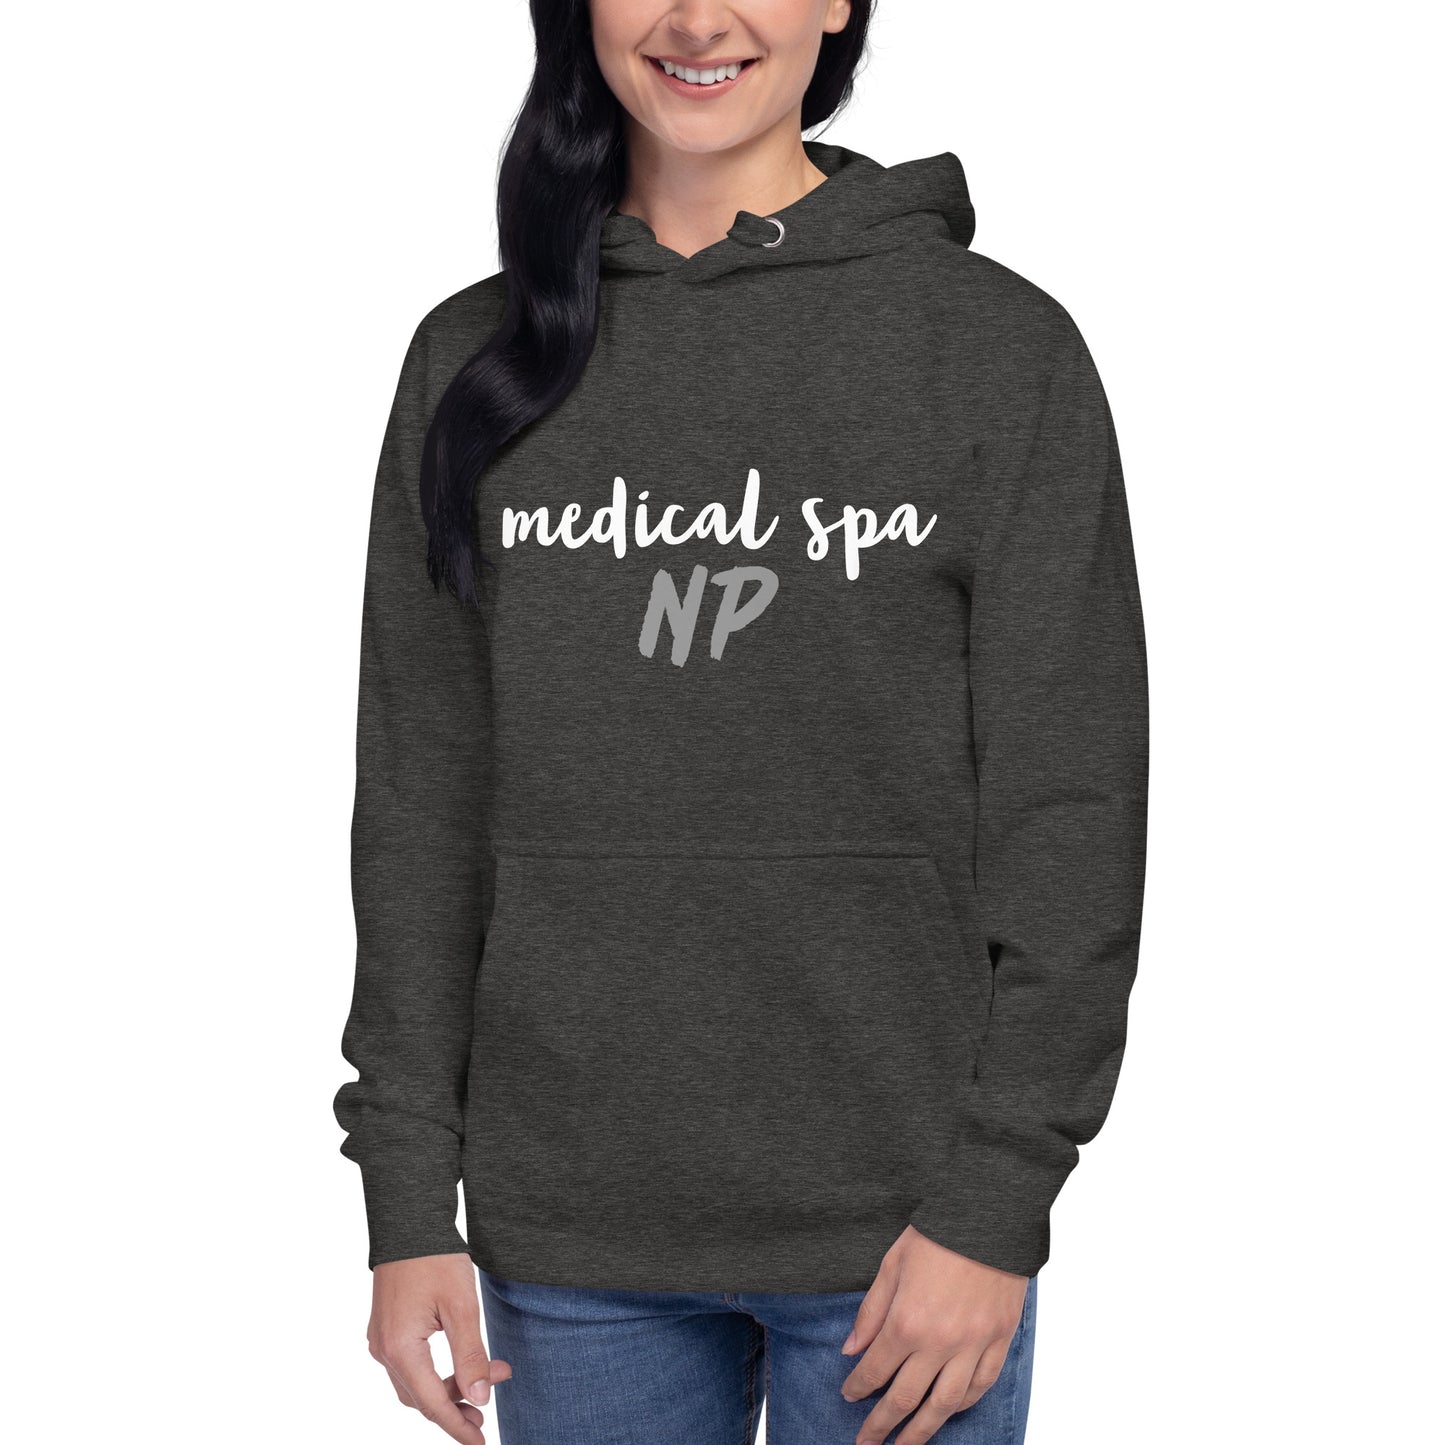 Unisex Hoodie-MSNP in script- a must have for all!